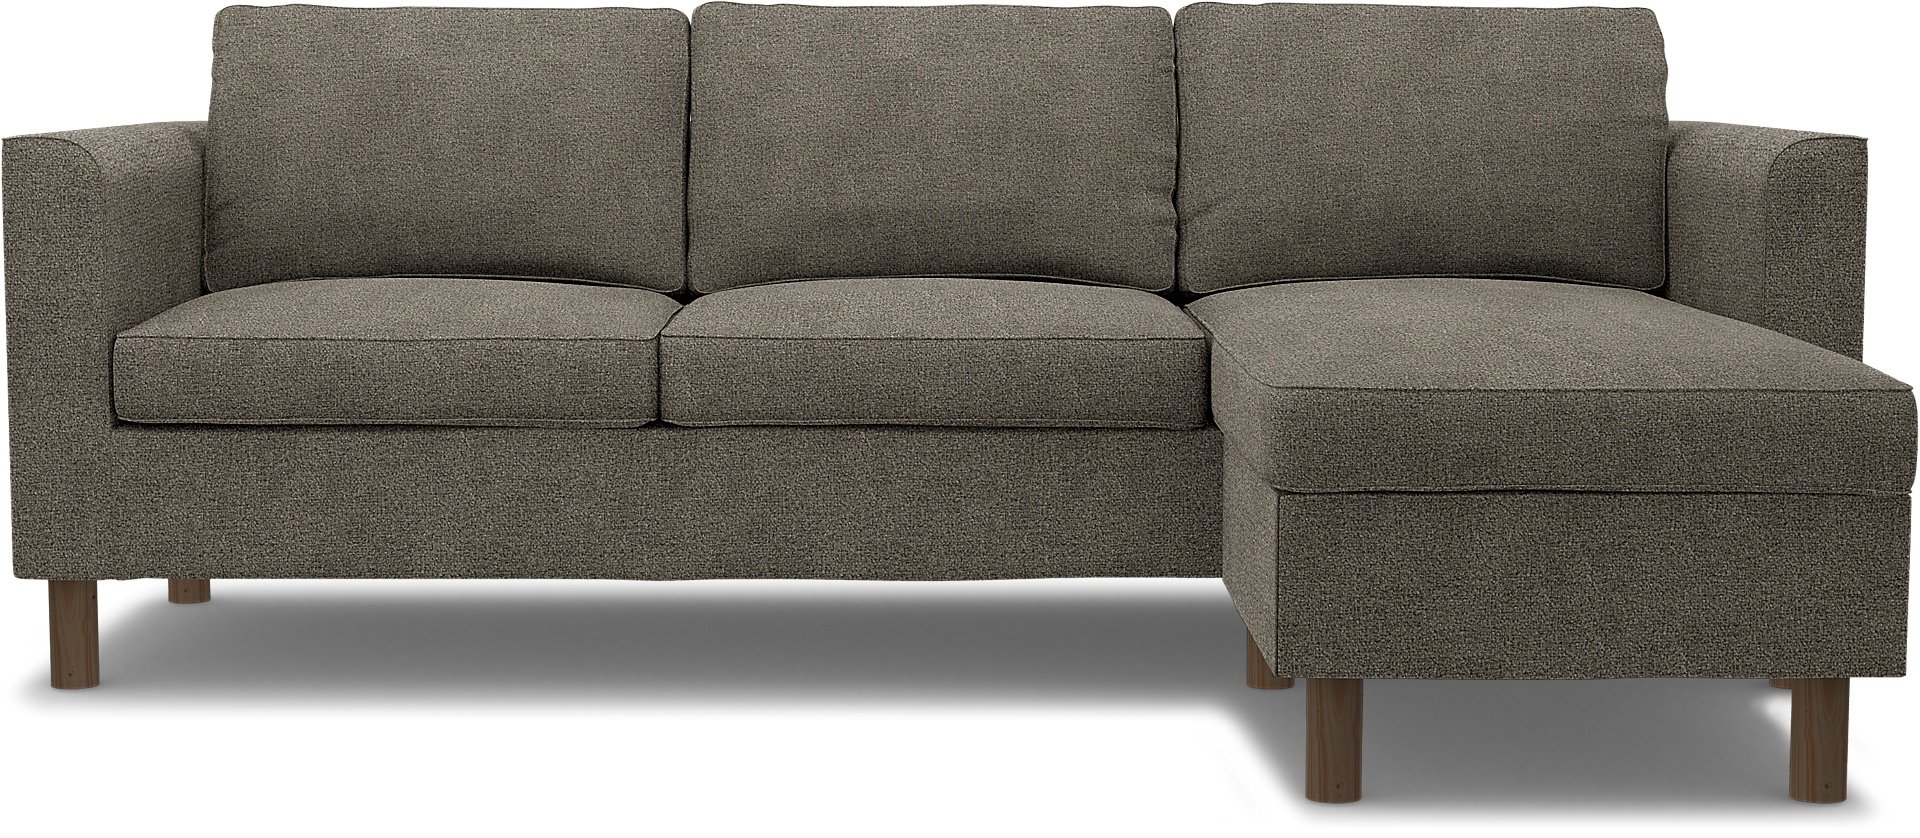 IKEA - Parup 3 Seater with chaise longue, Taupe, Boucle & Texture - Bemz